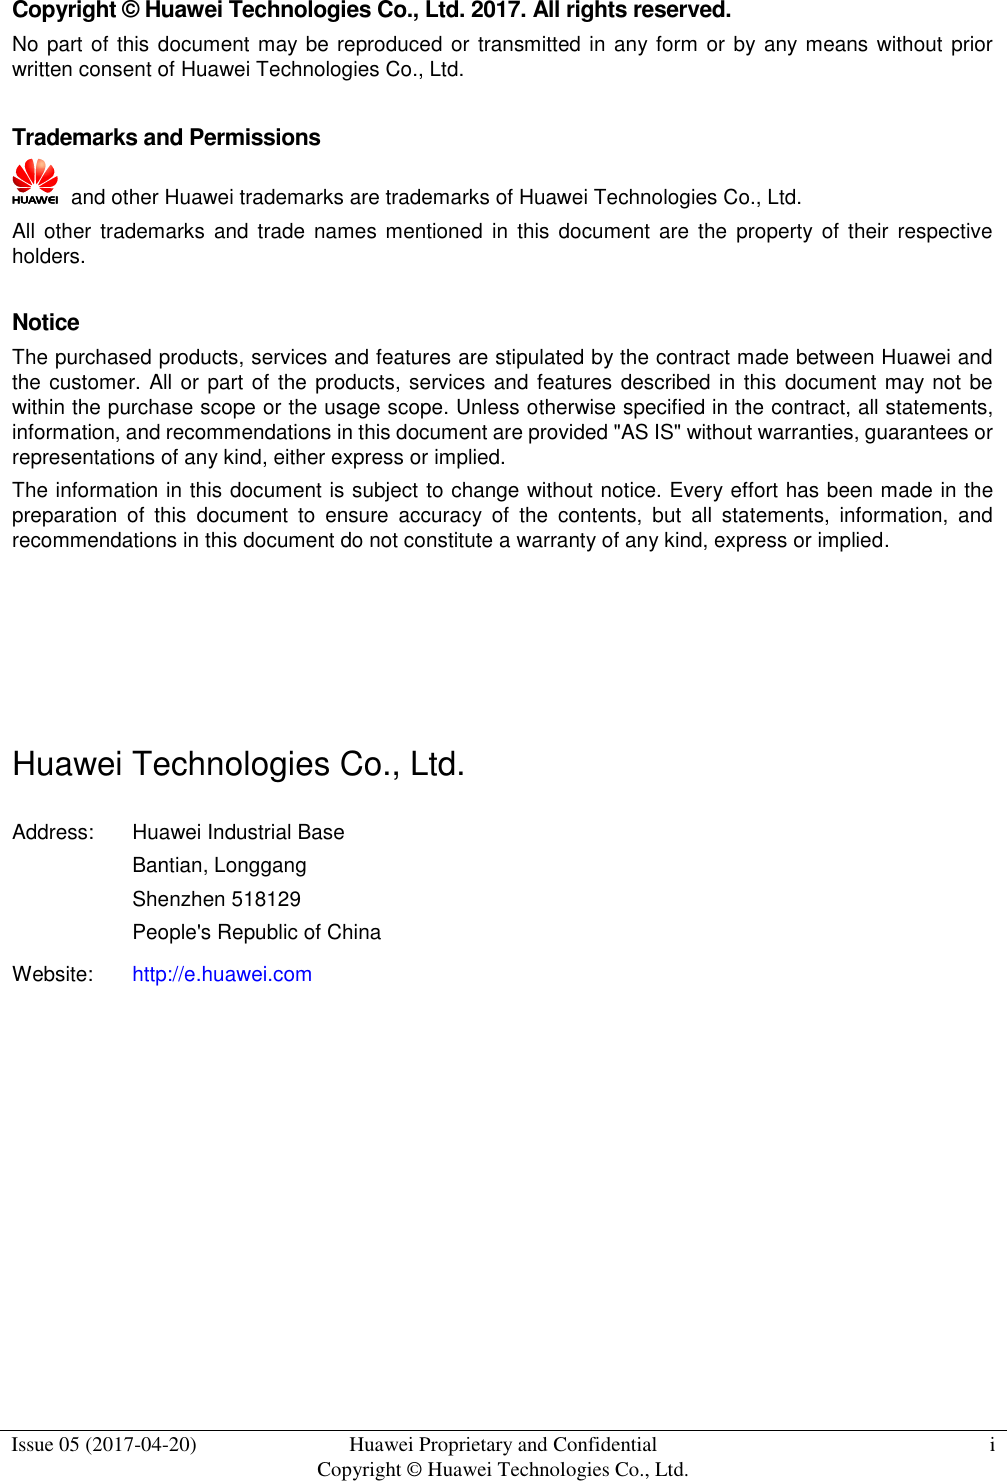  Issue 05 (2017-04-20) Huawei Proprietary and Confidential                                     Copyright © Huawei Technologies Co., Ltd. i  Copyright © Huawei Technologies Co., Ltd. 2017. All rights reserved. No part of this document may be reproduced or transmitted in any form or by any means without  prior written consent of Huawei Technologies Co., Ltd.  Trademarks and Permissions   and other Huawei trademarks are trademarks of Huawei Technologies Co., Ltd. All other trademarks and  trade  names  mentioned  in  this  document are  the  property  of  their respective holders.  Notice The purchased products, services and features are stipulated by the contract made between Huawei and the customer.  All or part of the products, services and features described in this  document may not be within the purchase scope or the usage scope. Unless otherwise specified in the contract, all statements, information, and recommendations in this document are provided &quot;AS IS&quot; without warranties, guarantees or representations of any kind, either express or implied. The information in this document is subject to change without notice. Every effort has been made in the preparation  of  this  document  to  ensure  accuracy  of  the  contents,  but  all  statements,  information,  and recommendations in this document do not constitute a warranty of any kind, express or implied.     Huawei Technologies Co., Ltd. Address: Huawei Industrial Base Bantian, Longgang Shenzhen 518129 People&apos;s Republic of China Website: http://e.huawei.com        